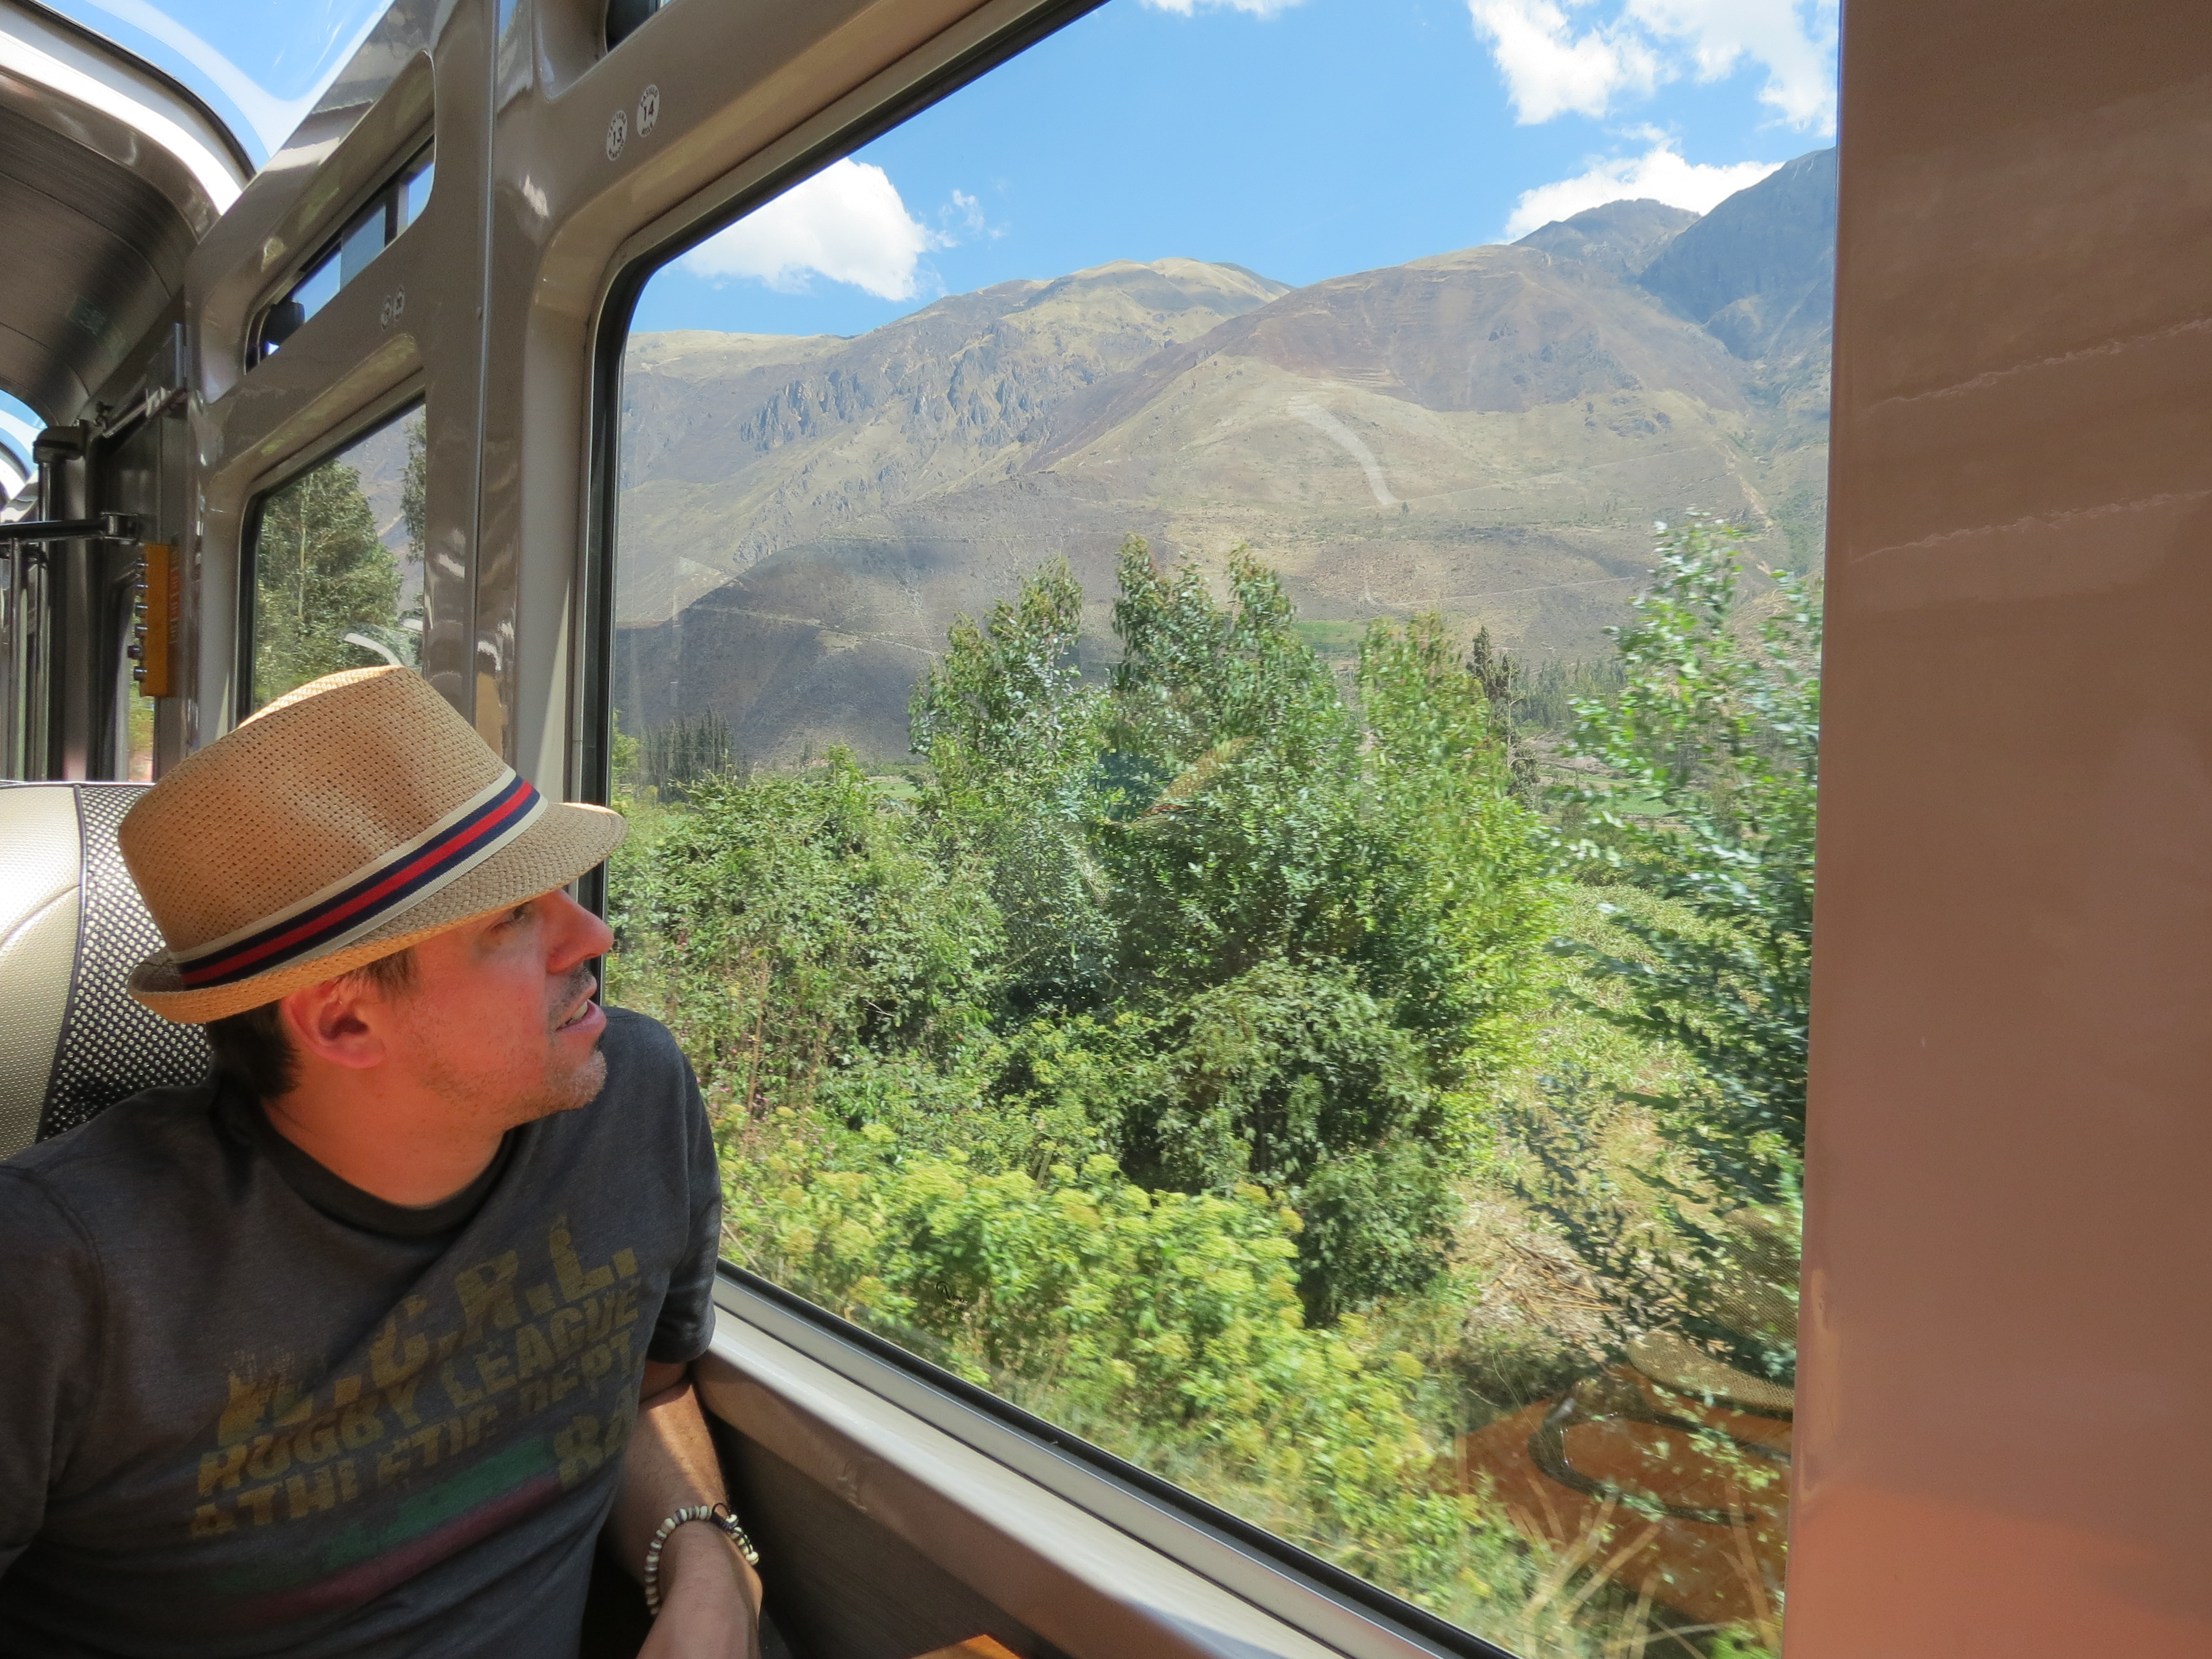 Day 3 - Train Ride to Aguas Calientes